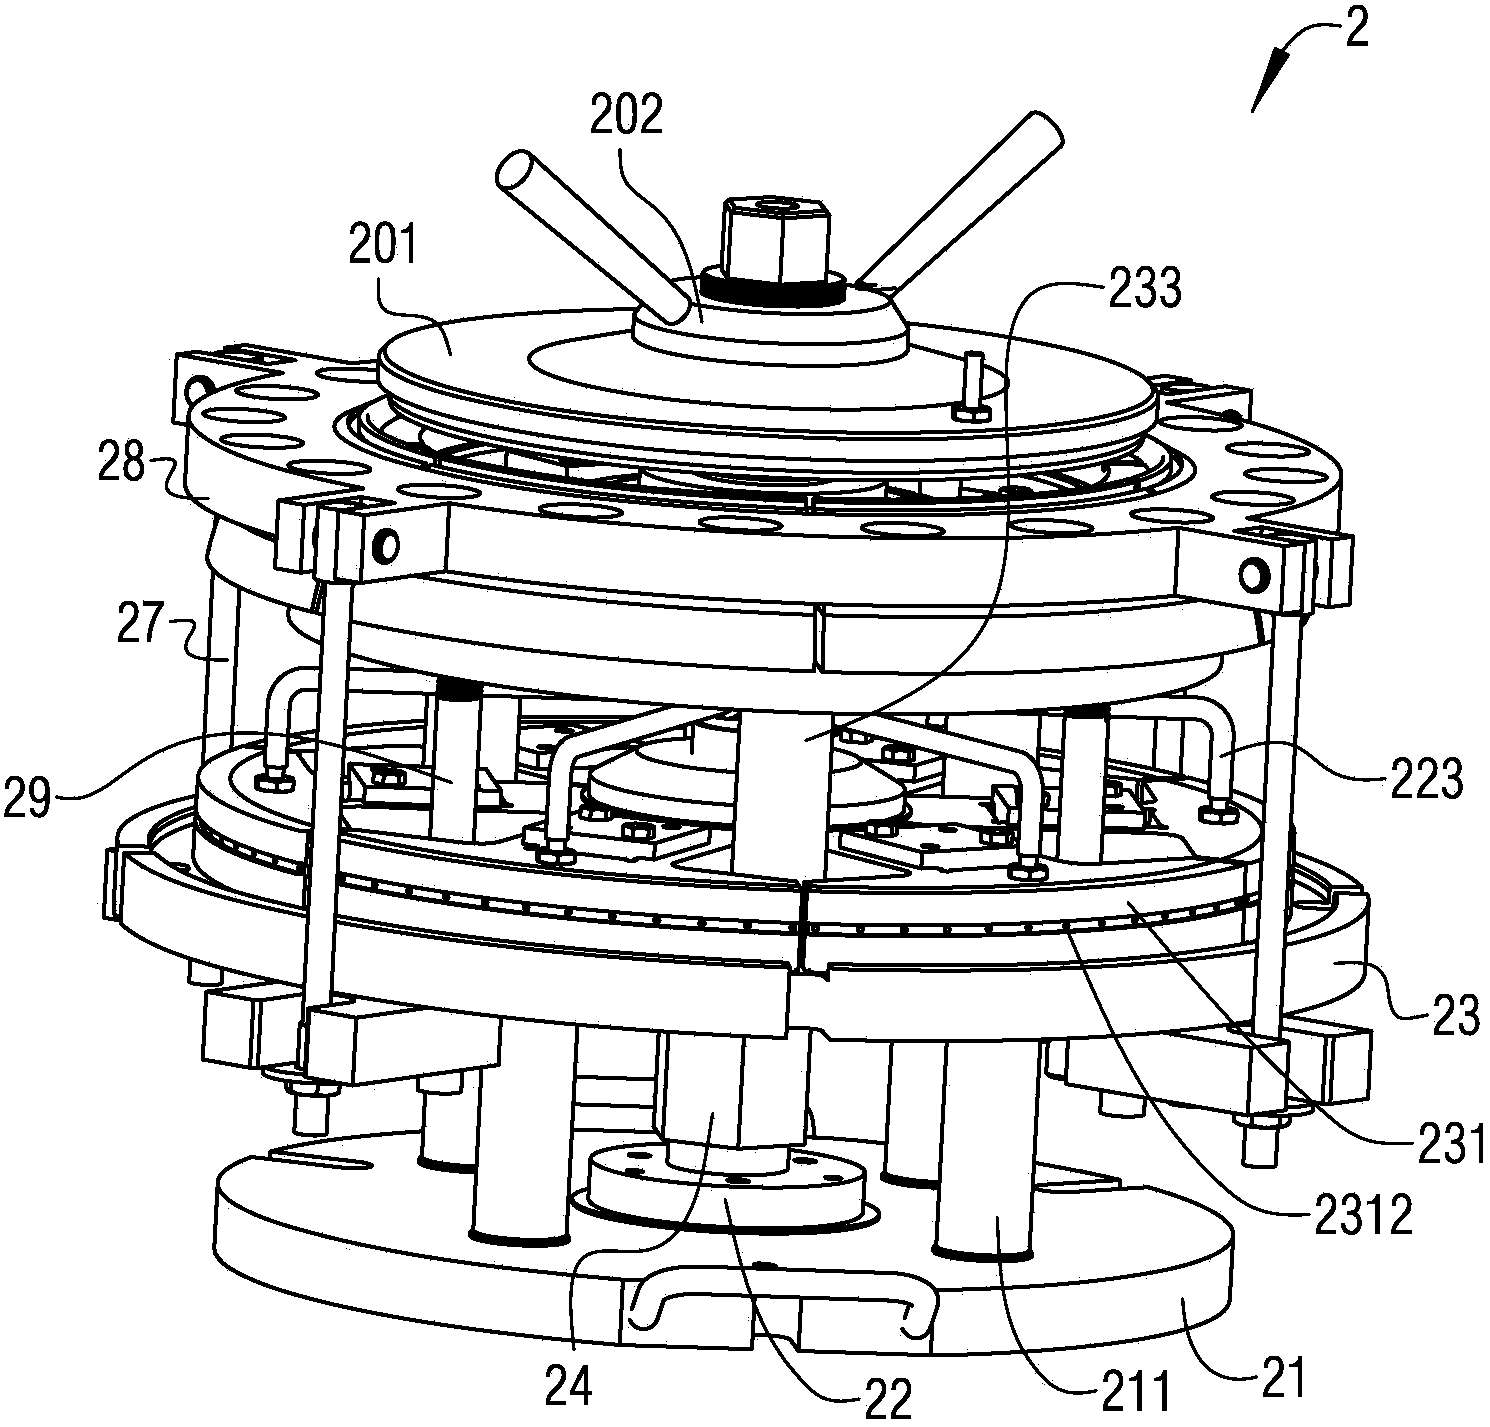 Cartridge receiver welding method and clamp applied to same